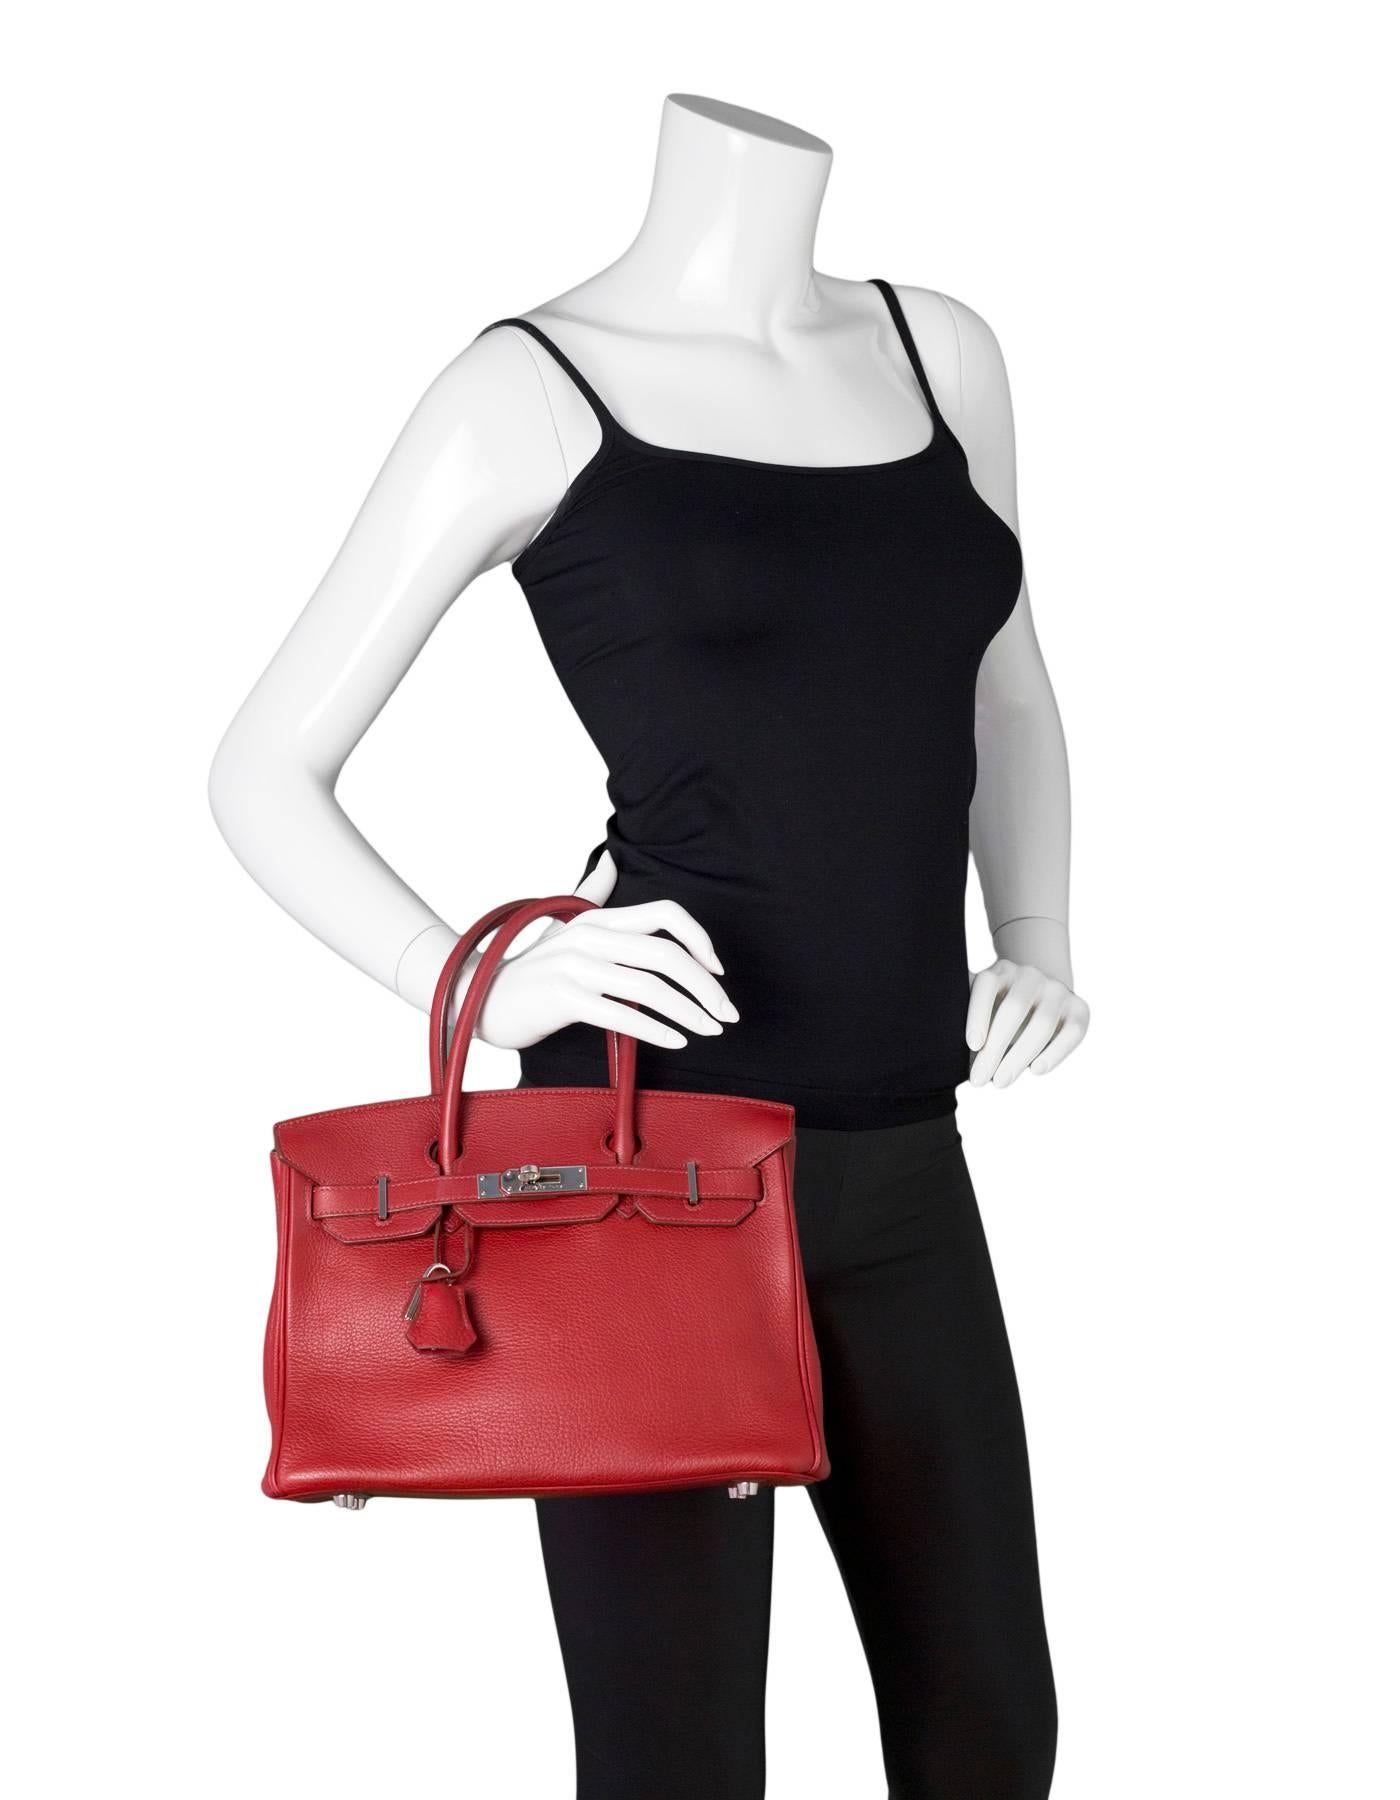 Hermes Red Clemence Leather 30cm Birkin Bag

Made In: France
Year of Production: 2007
Color: Red
Hardware: Palladium
Materials: Clemence leather
Lining: Red leather
Closure/Opening: Flap top with two leather arms that come to center for twist